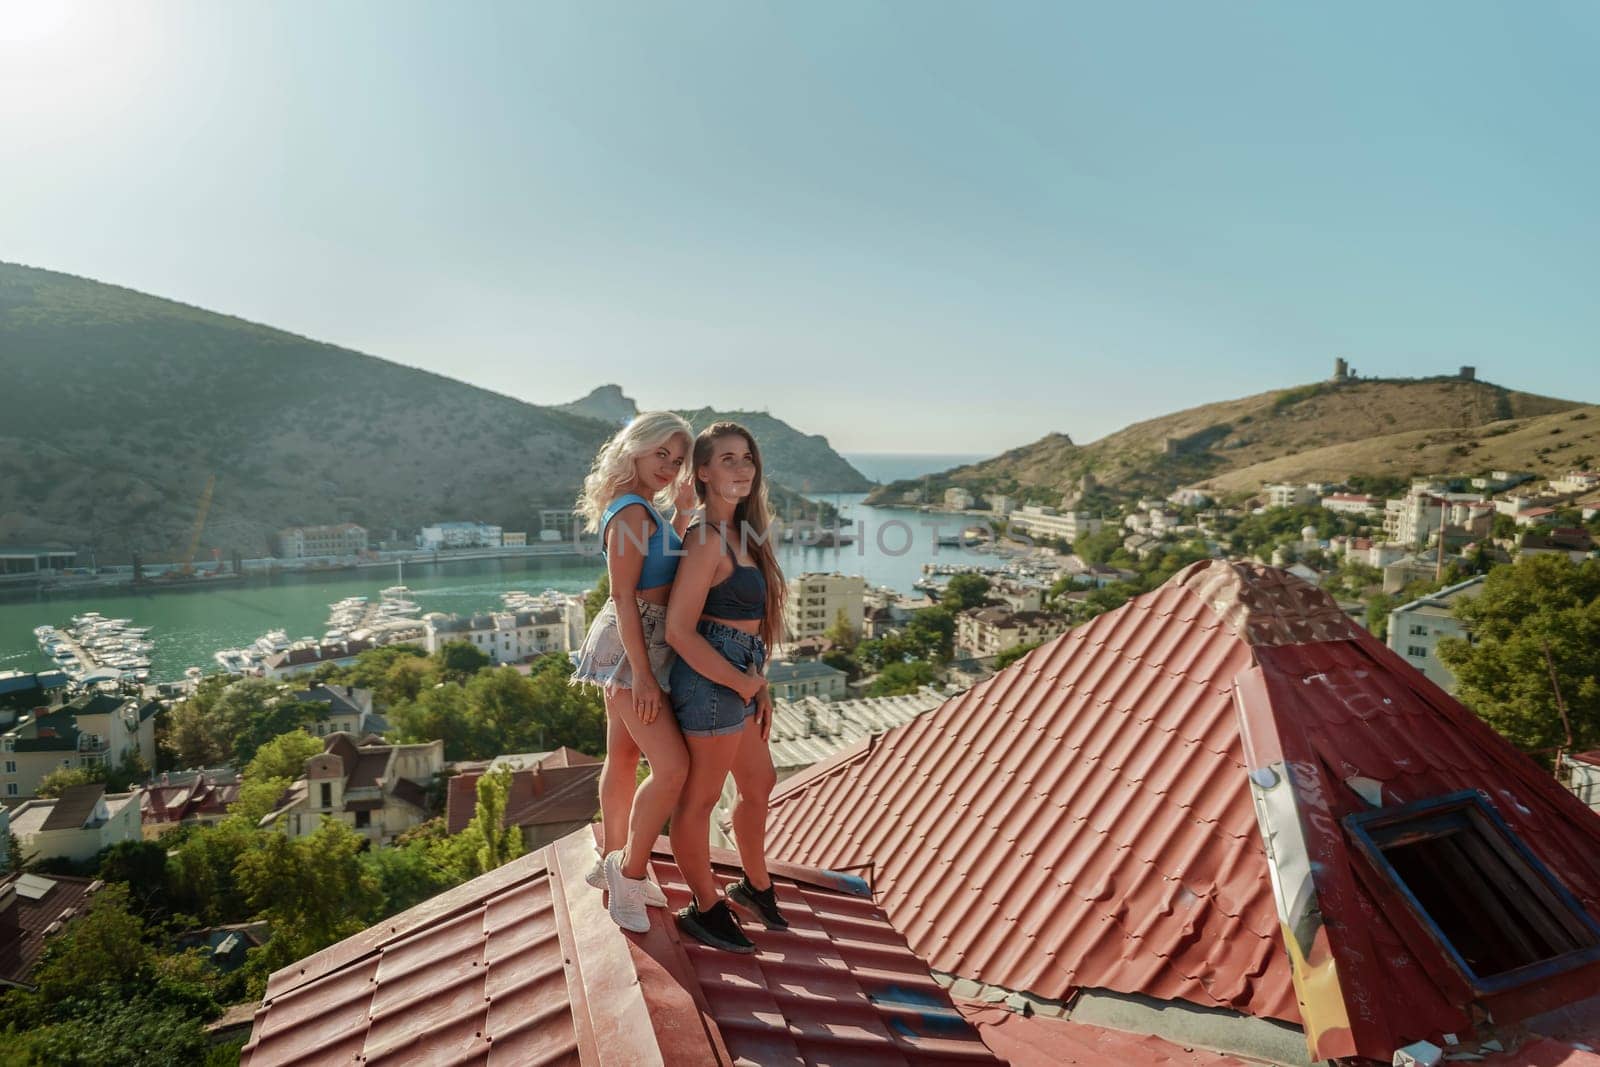 women standing on rooftop, enjoys town view and sea mountains. Peaceful rooftop relaxation. Below her, there is a town with several boats visible in the water. Rooftop vantage point. by Matiunina